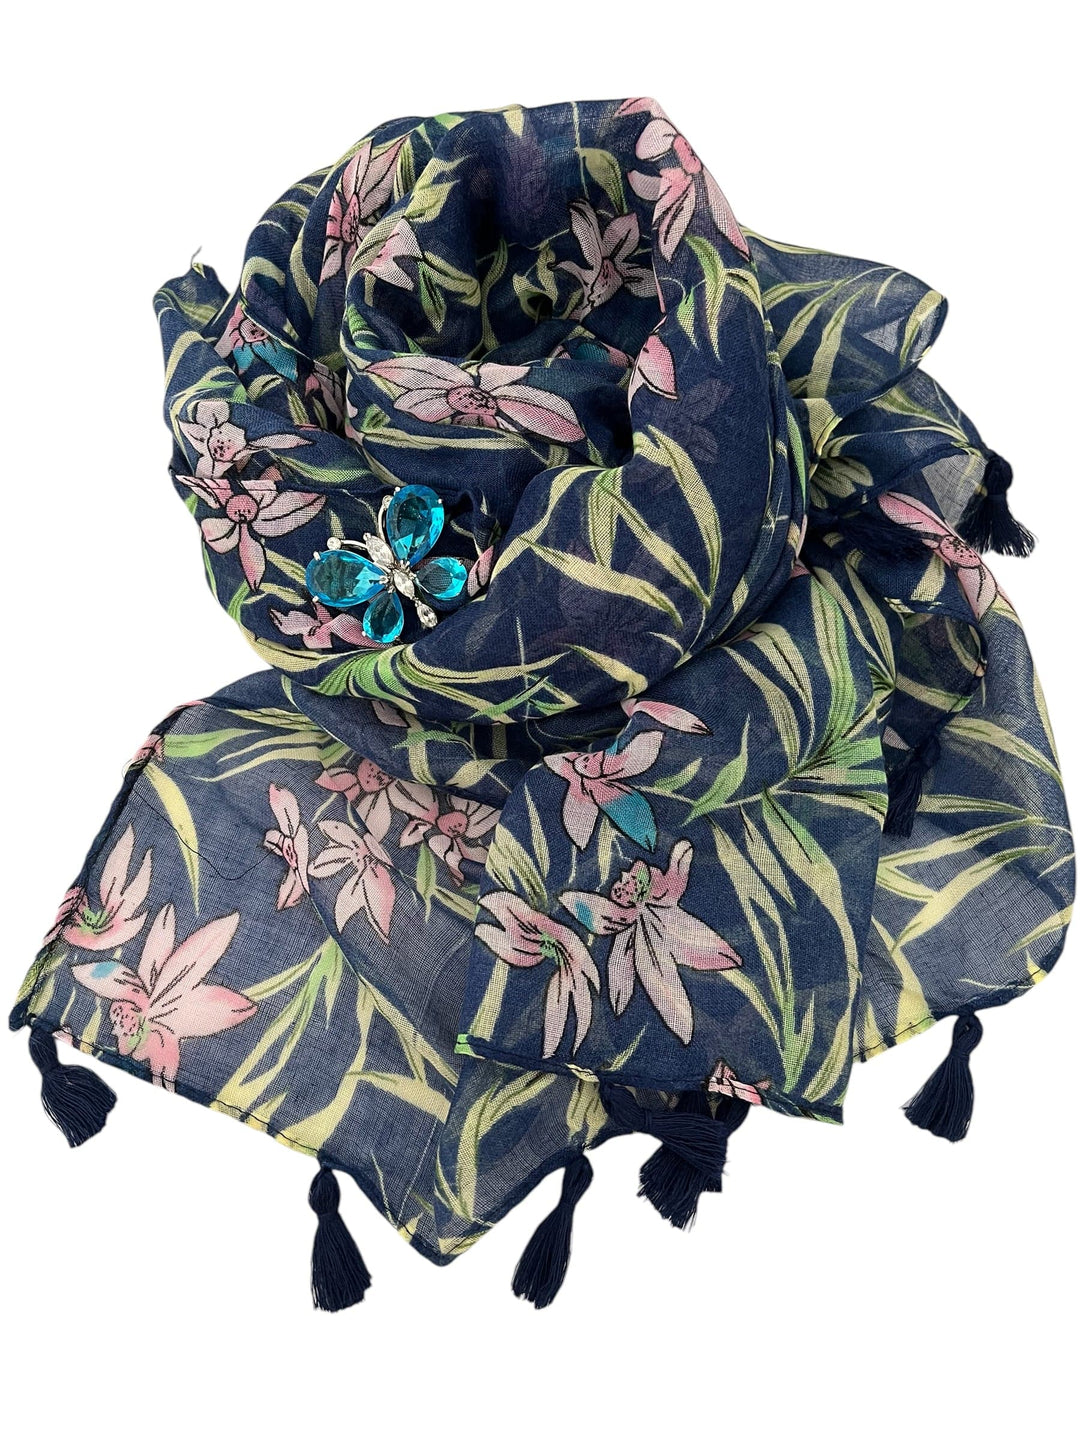 Scarves Australia Gift Packs Floral Scarf Navy w Tassels +Turquoise Butterfly Brooch